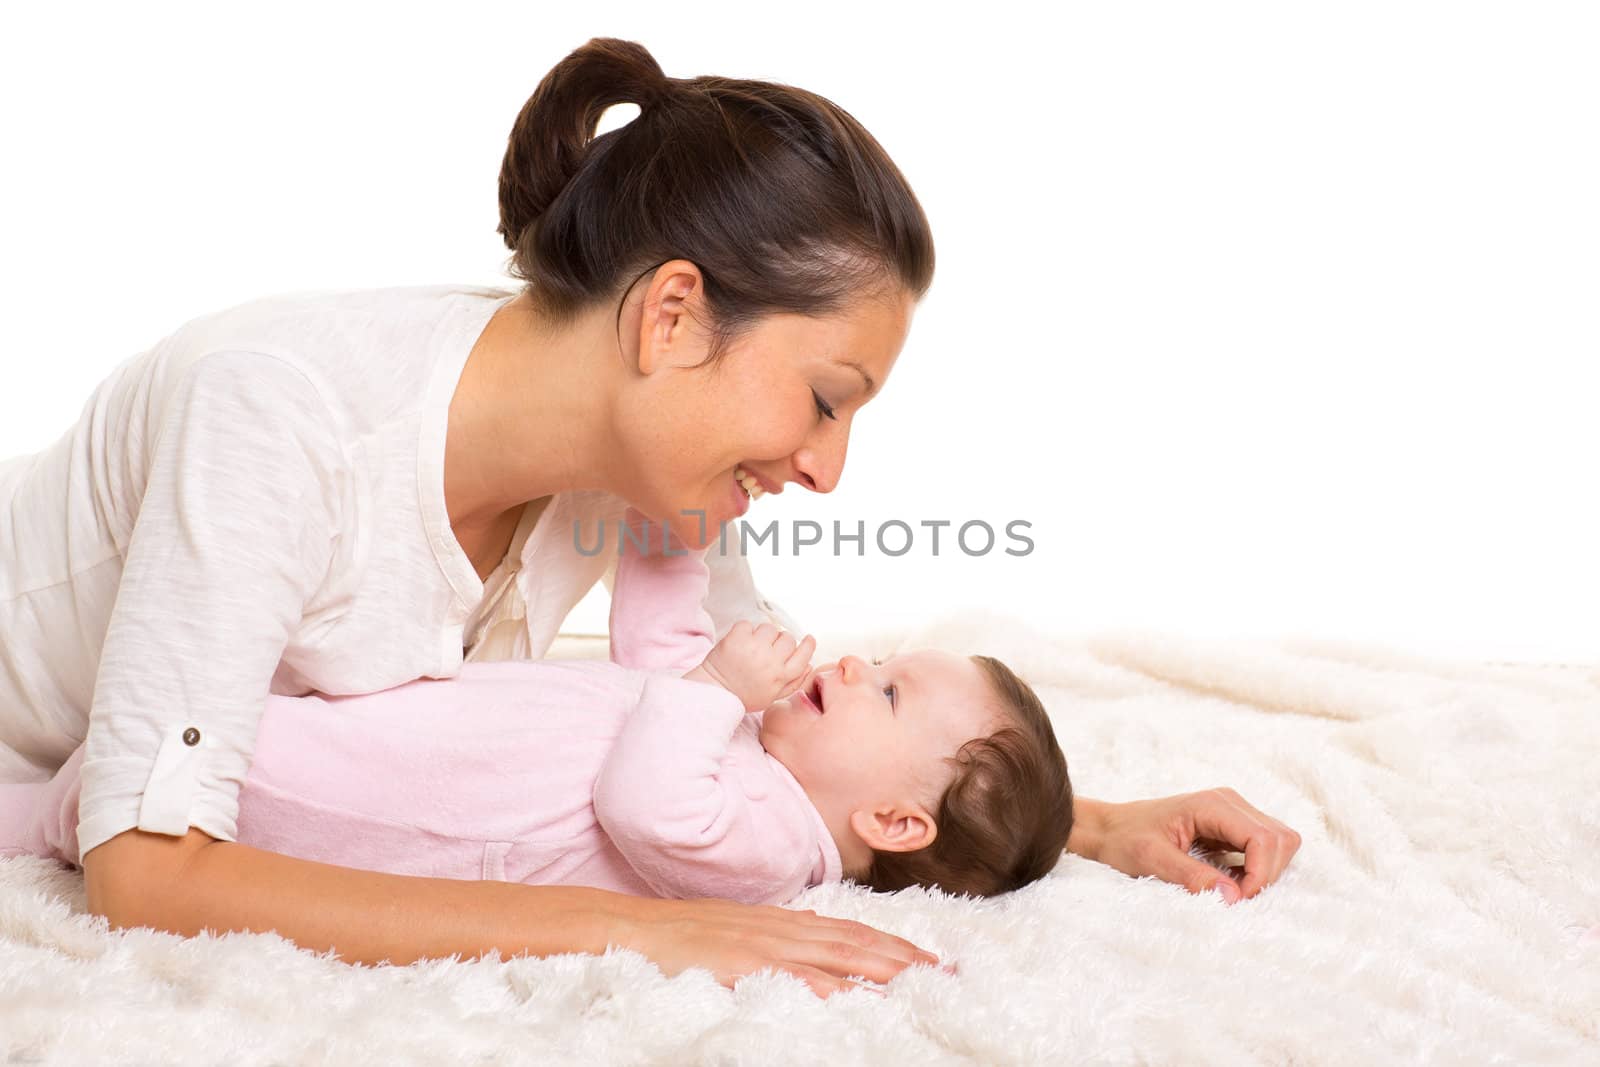 Baby girl and mother lying happy playing together on white fur blanket